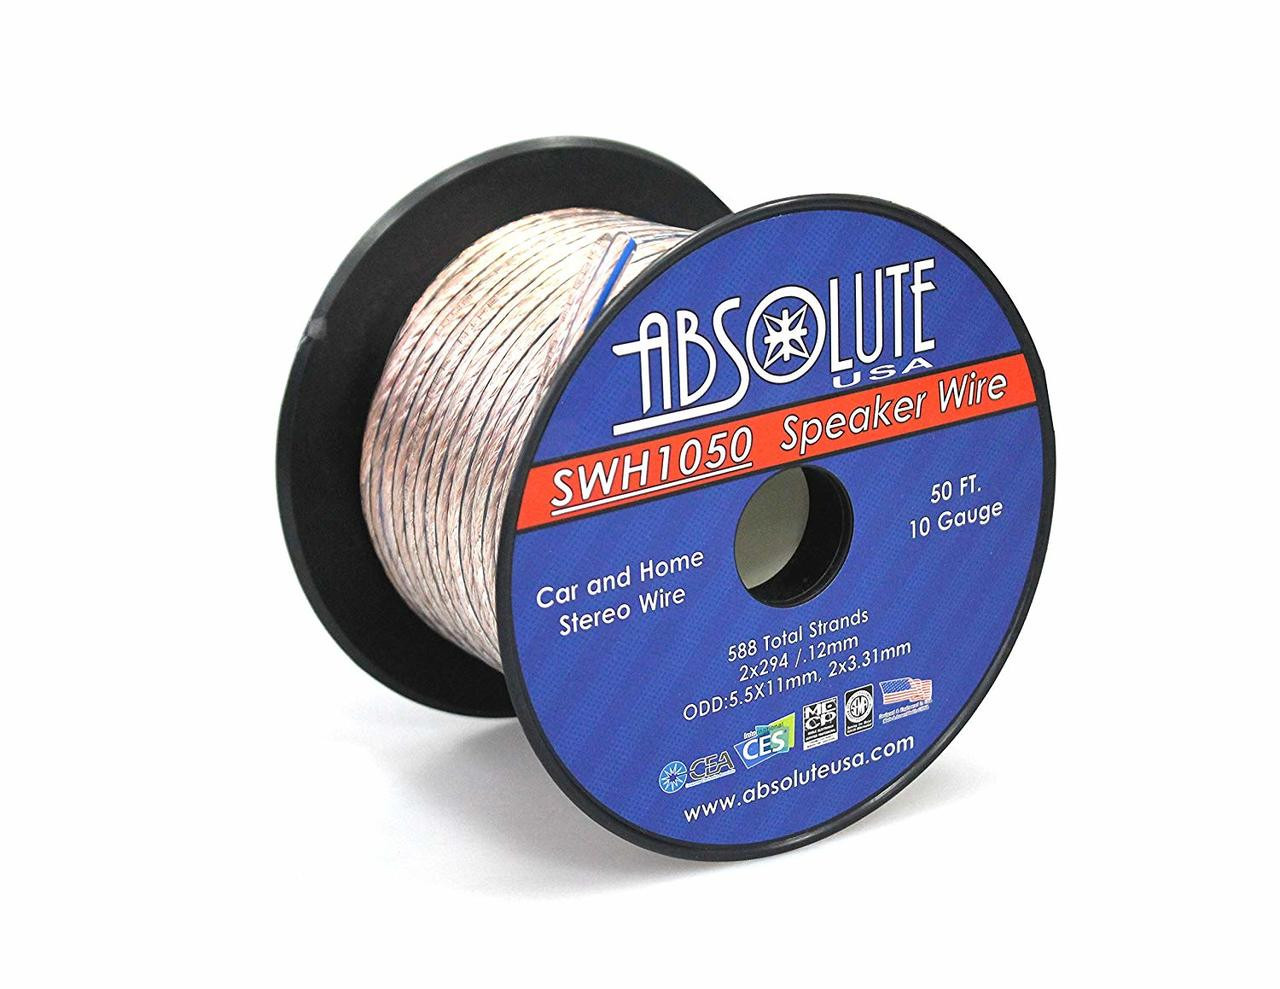 Absolute USA SWH1050 10 Gauge Car Home Audio Speaker Wire Cable Spool 50'